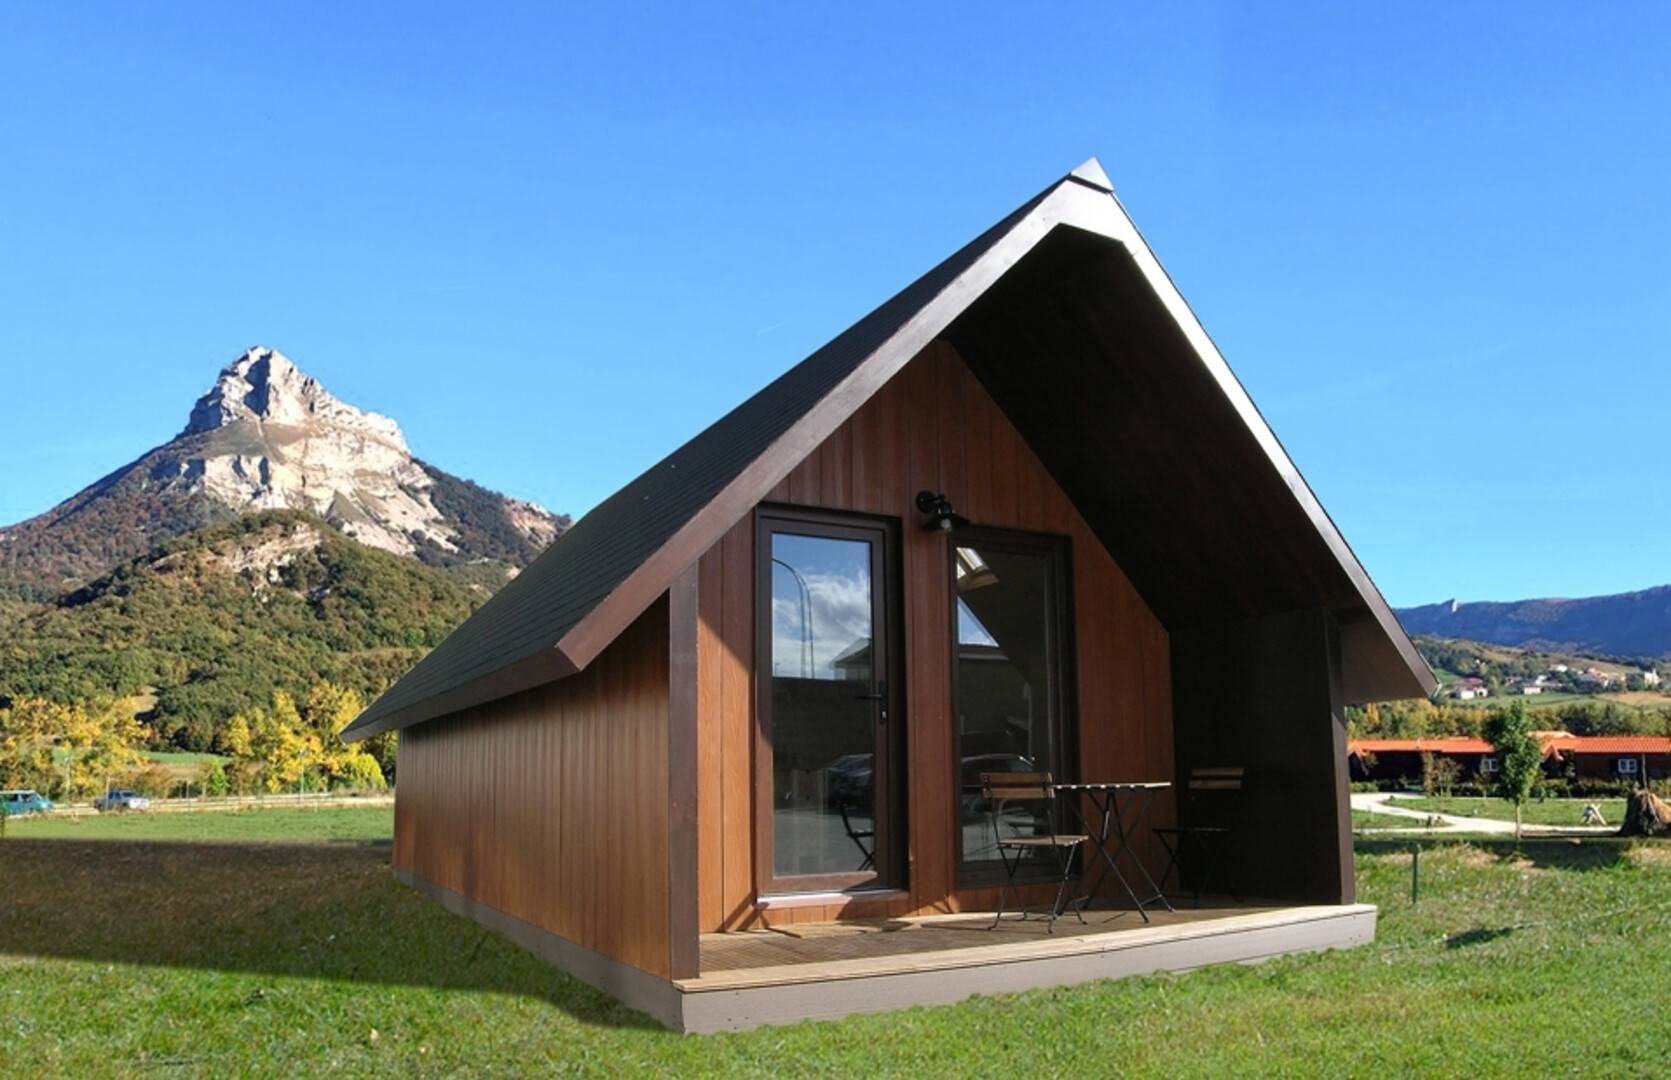 Wooden house in an eco-campsite with Mount Beriain in the background